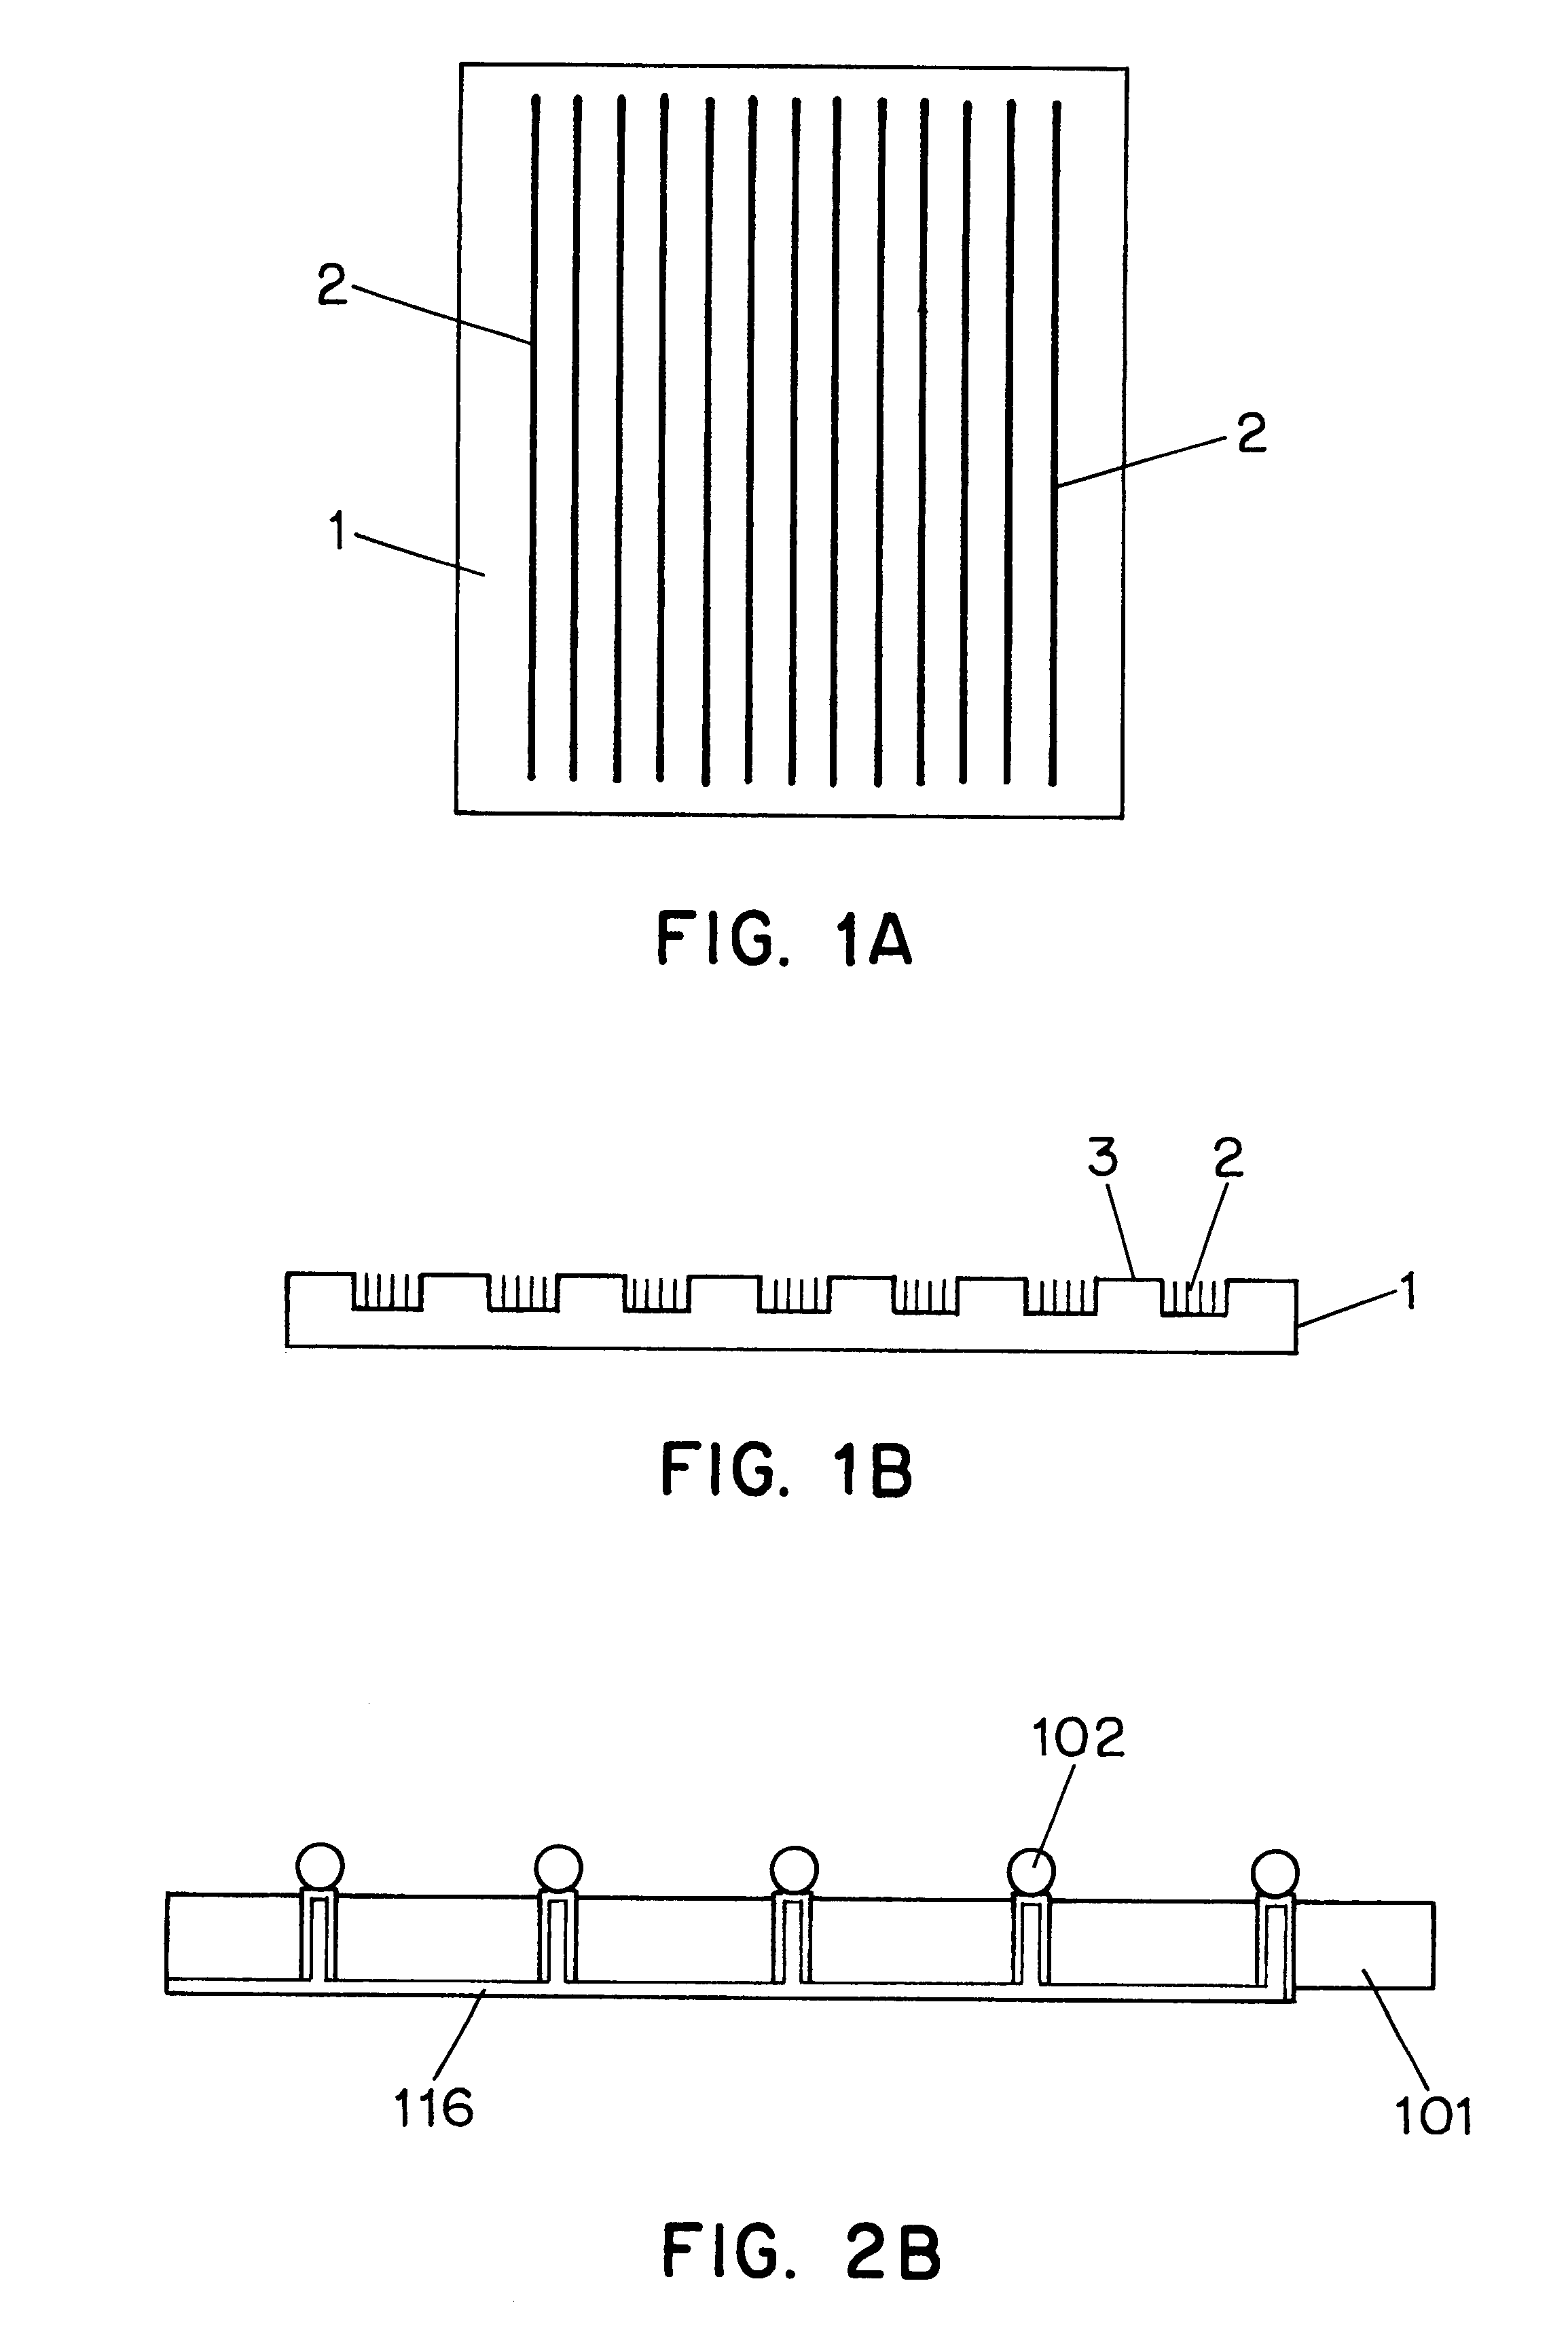 Micro-electrophoresis chip for moving and separating nucleic acids and other charged molecules